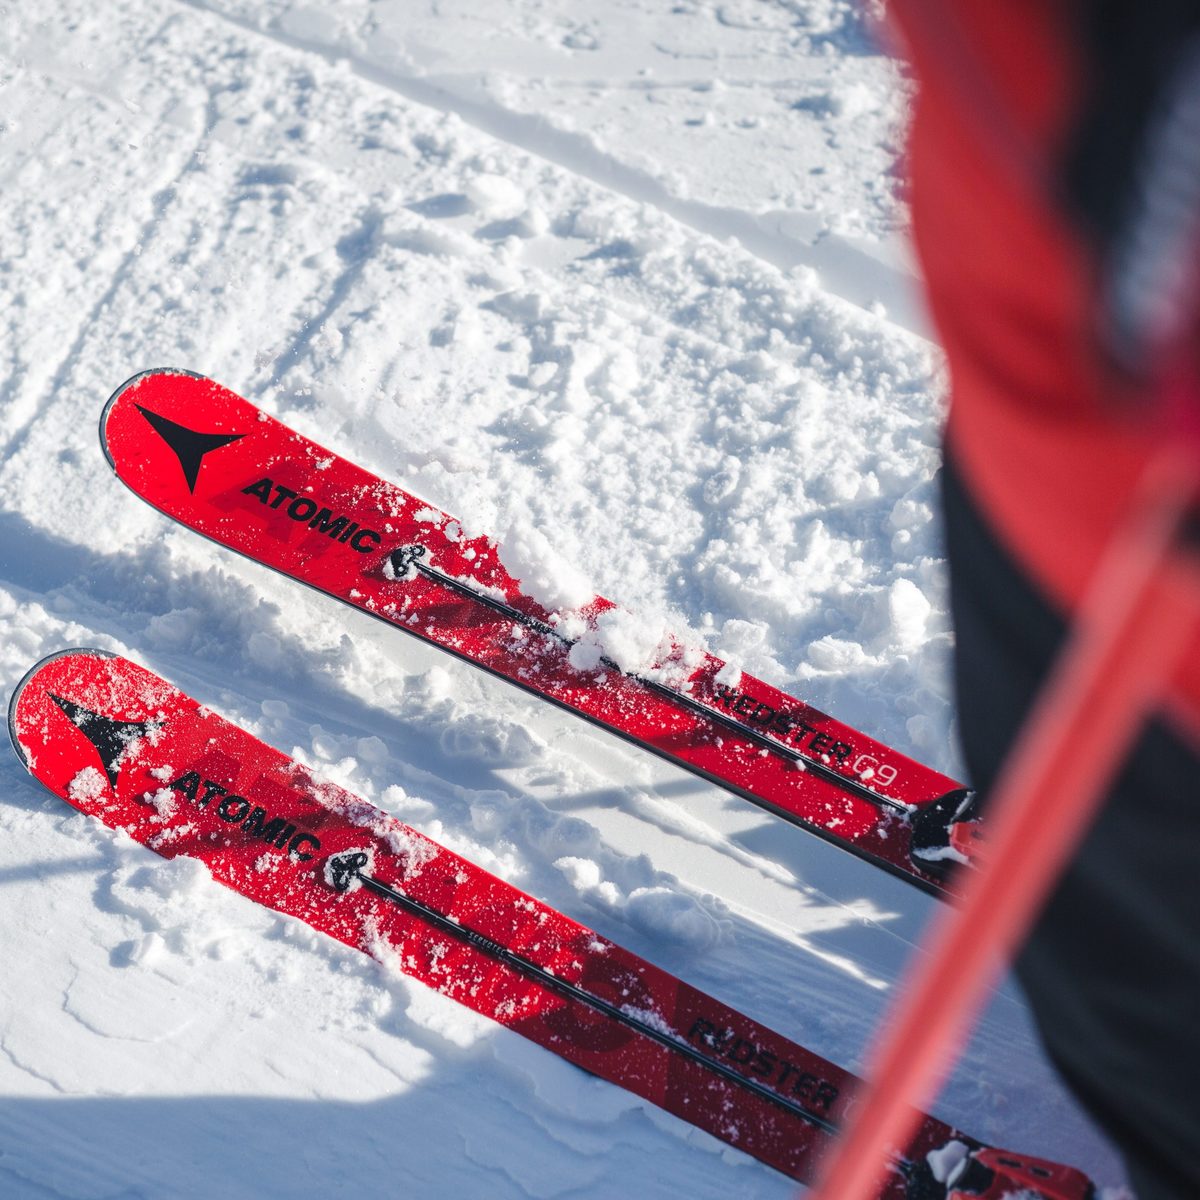 Top down view of Atomic Redster skis with Atomic logo on the snow